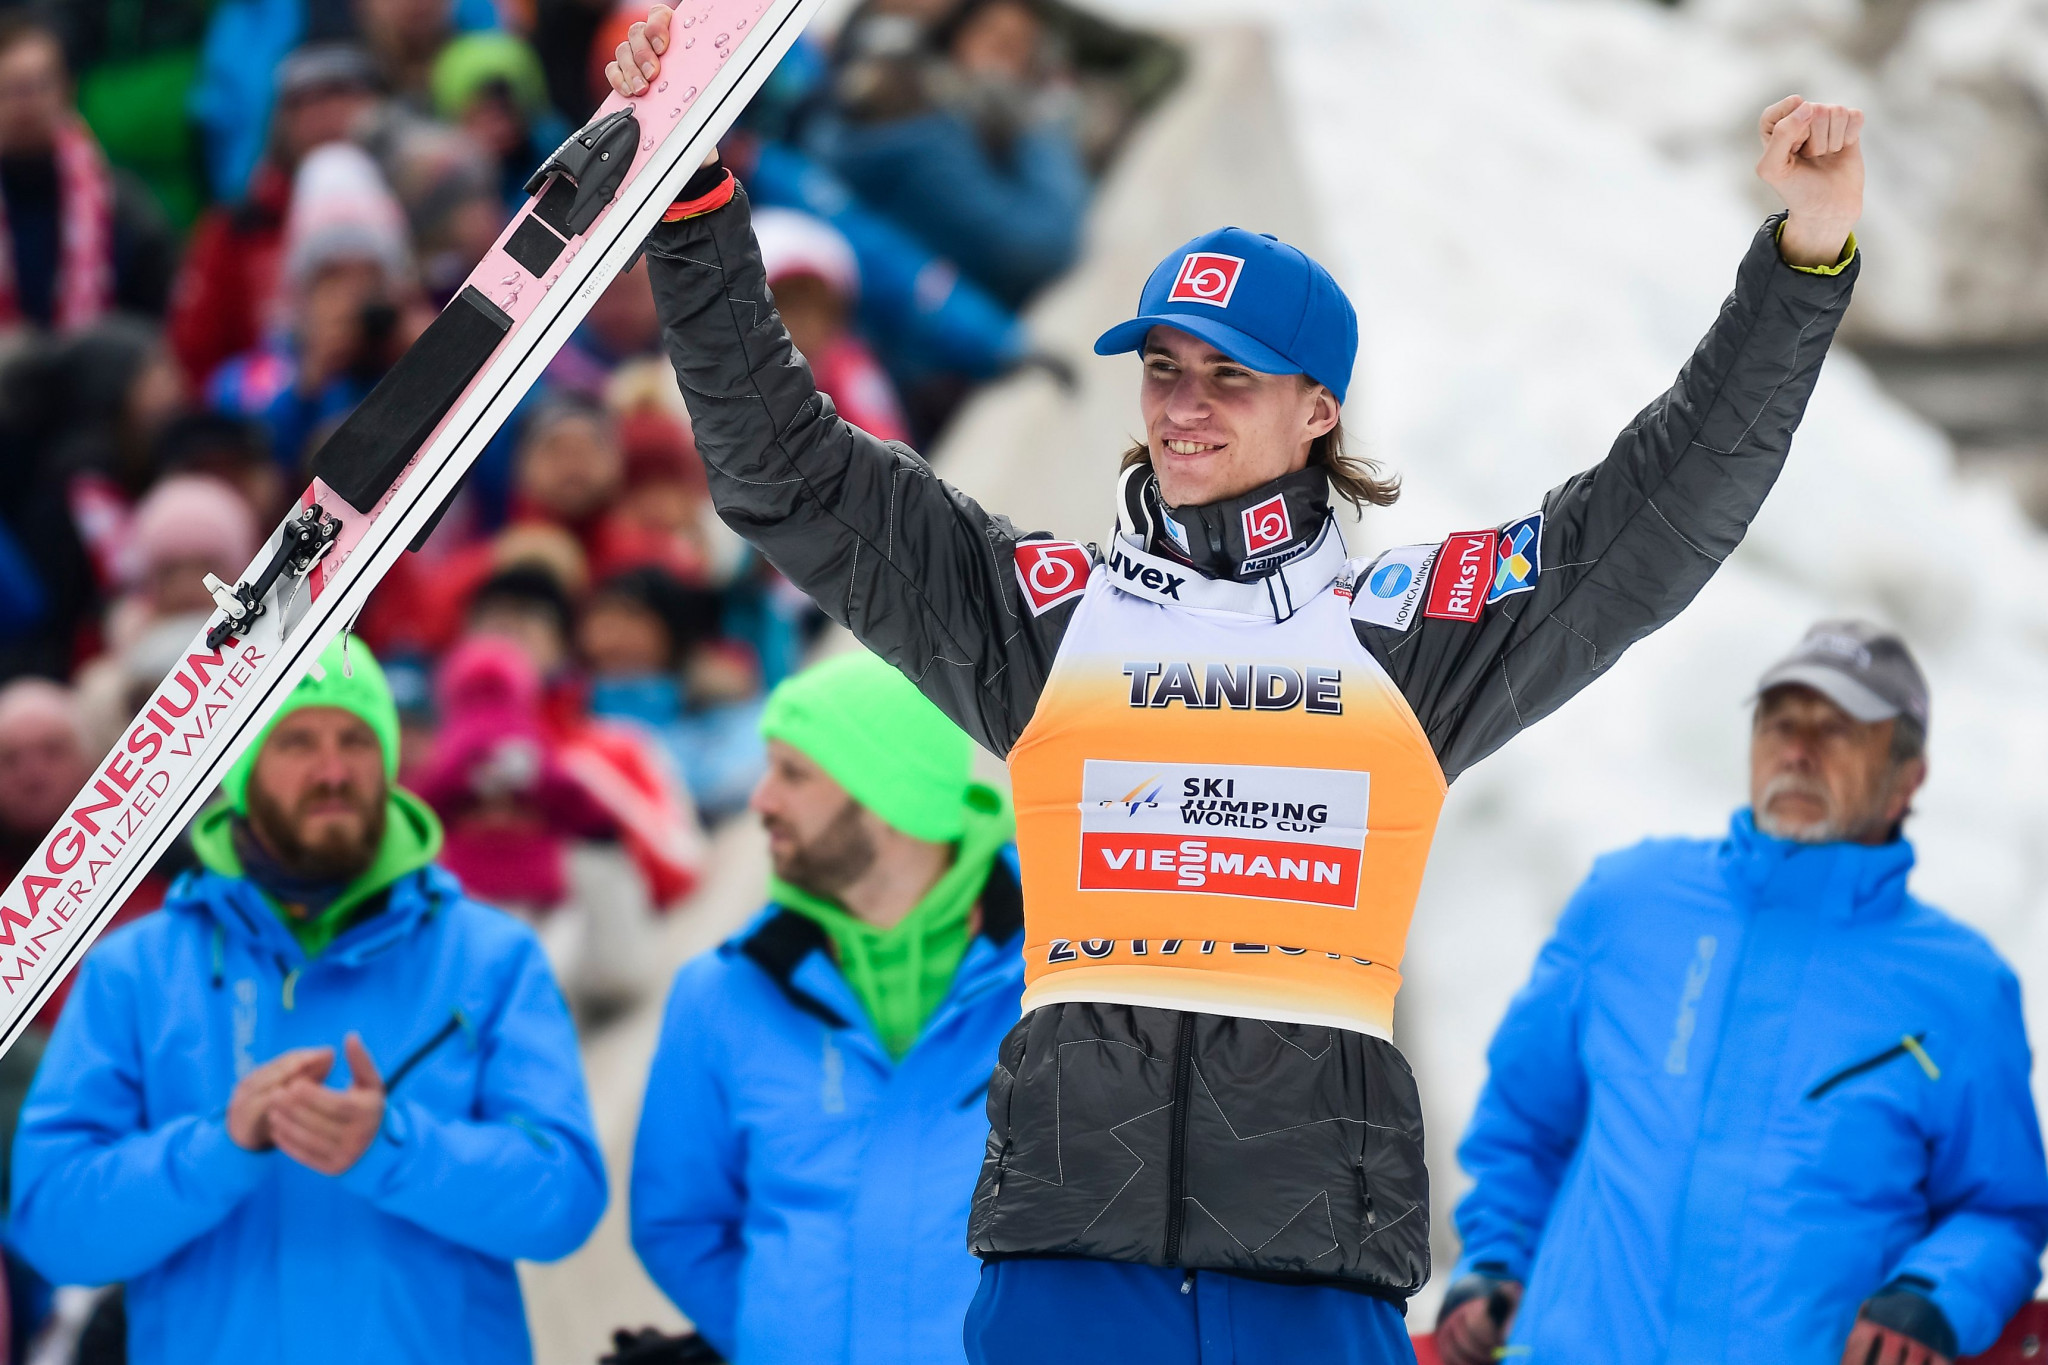 Olympic ski jumping champion Tande reveals battle against rare disease